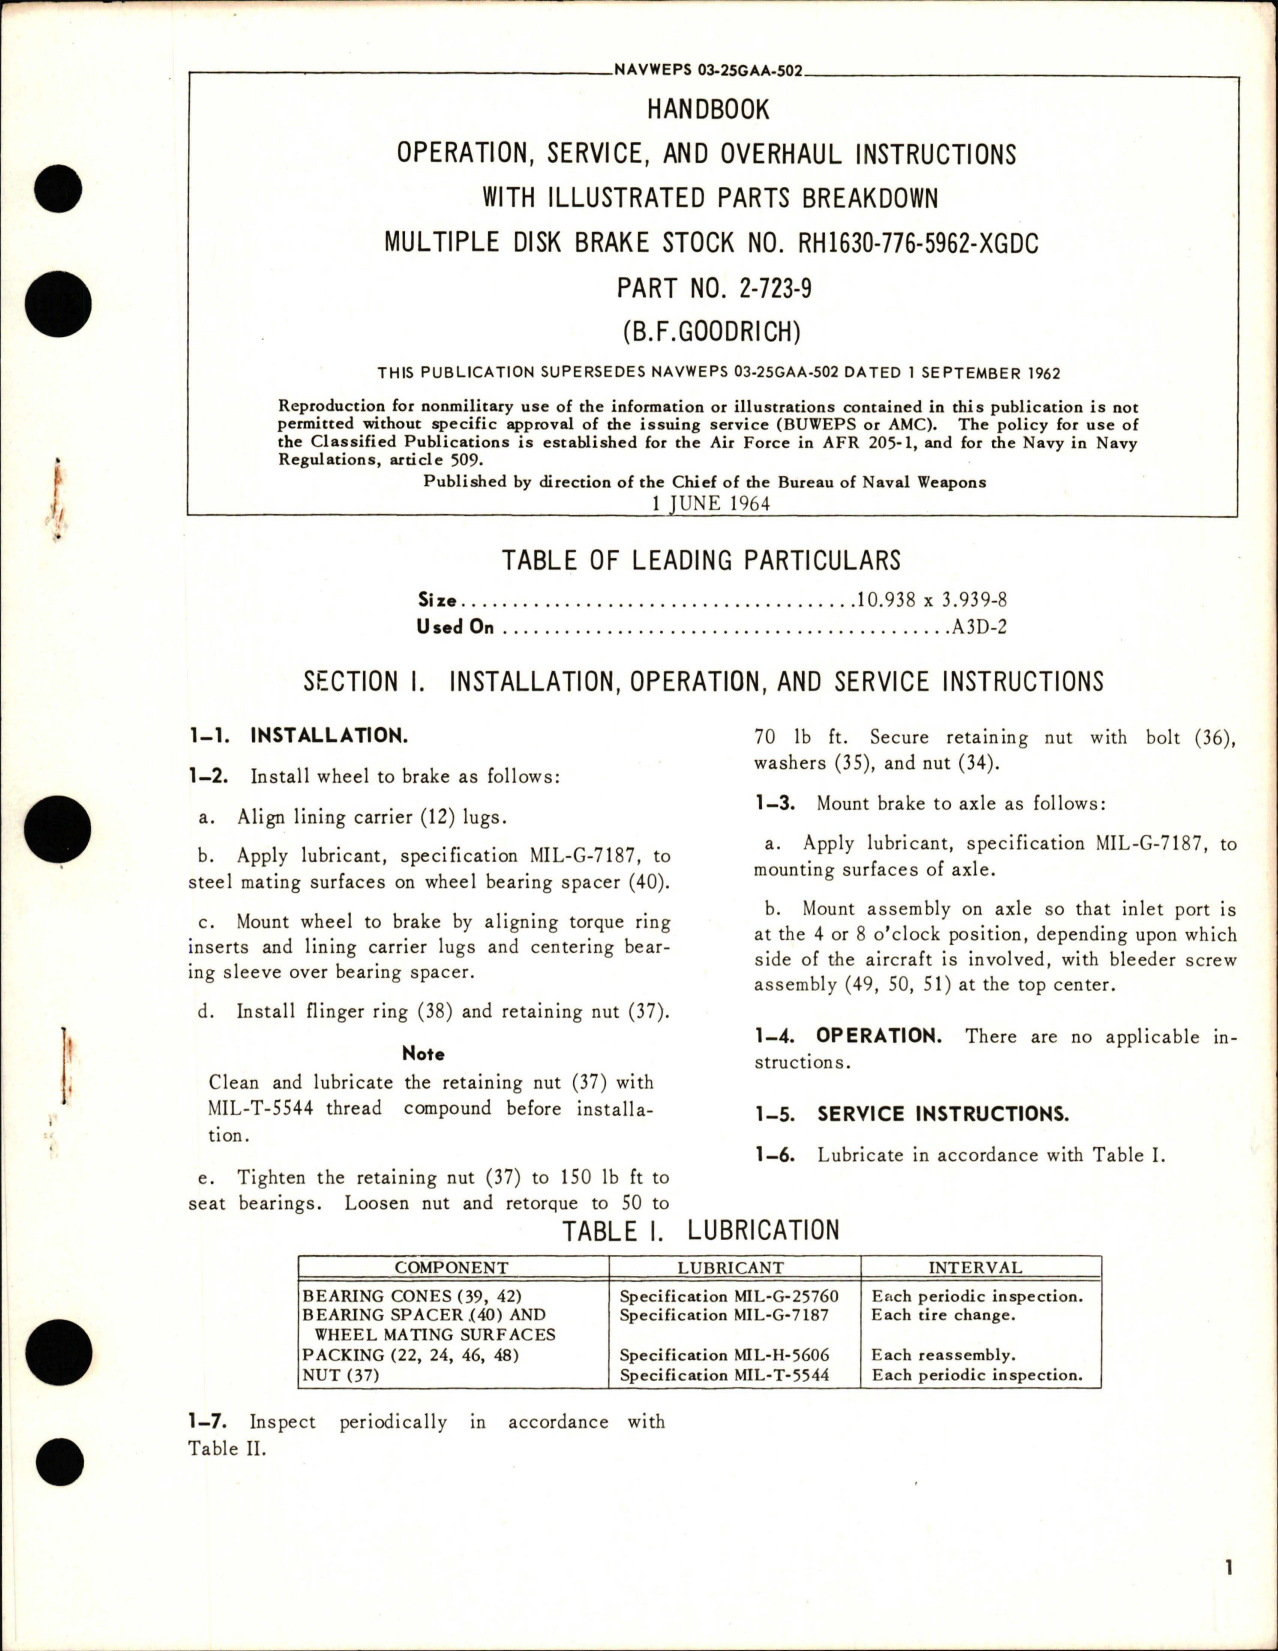 Sample page 1 from AirCorps Library document: Operation, Service and Overhaul Instructions with Illustrated Parts Breakdown for Multiple Disk Brake - Stock RH1630-776-5962-XGDC - Part 2-723-9